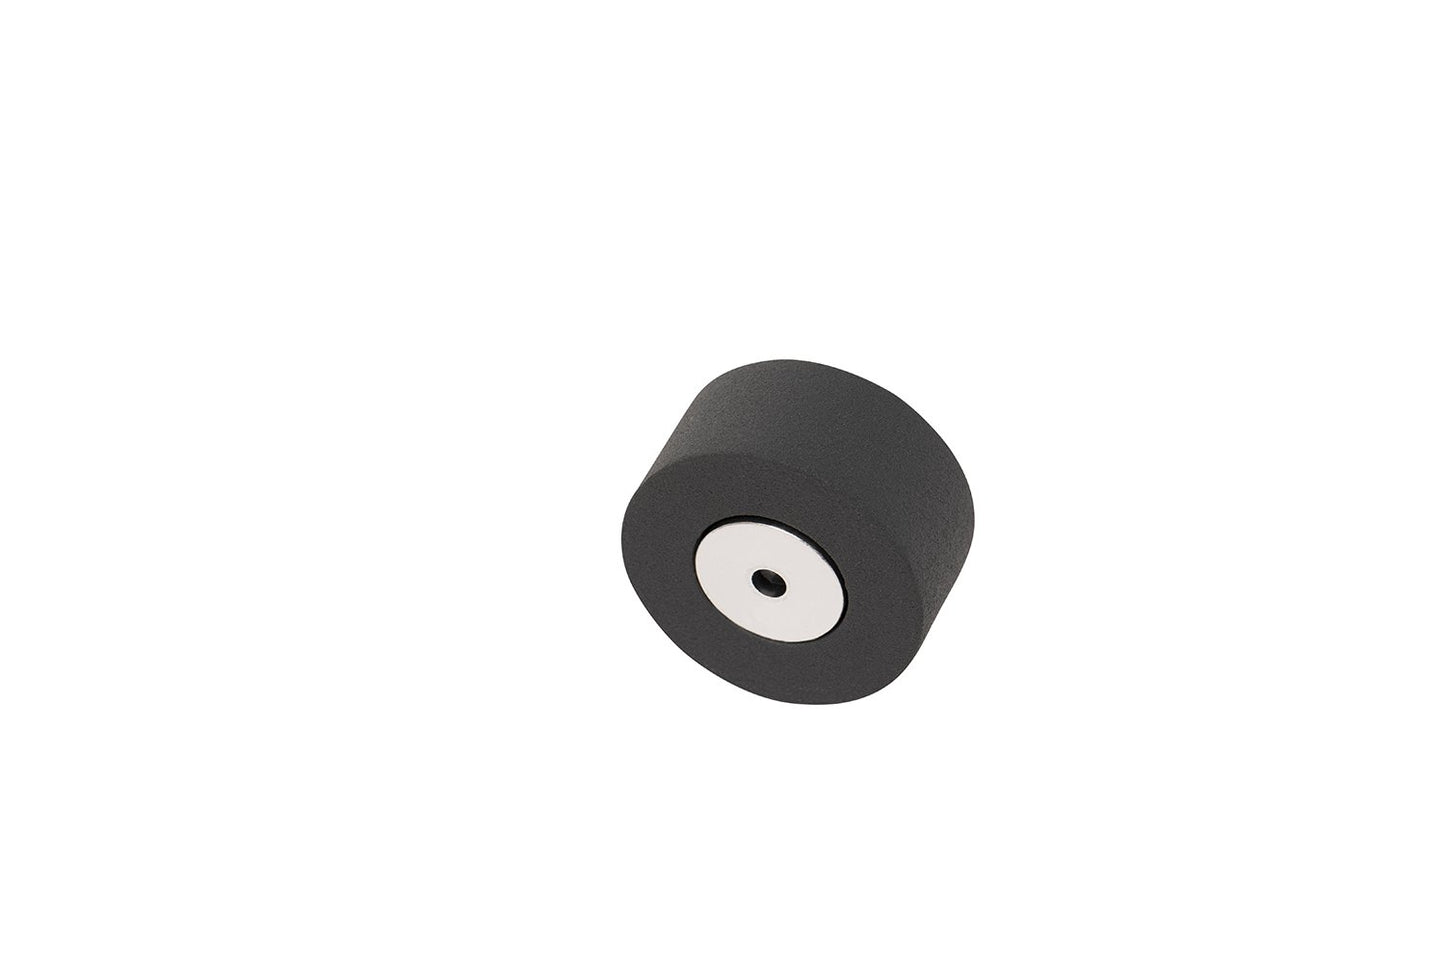 Prova PA8b Anthracite Handrail Connection/Wall Terminal